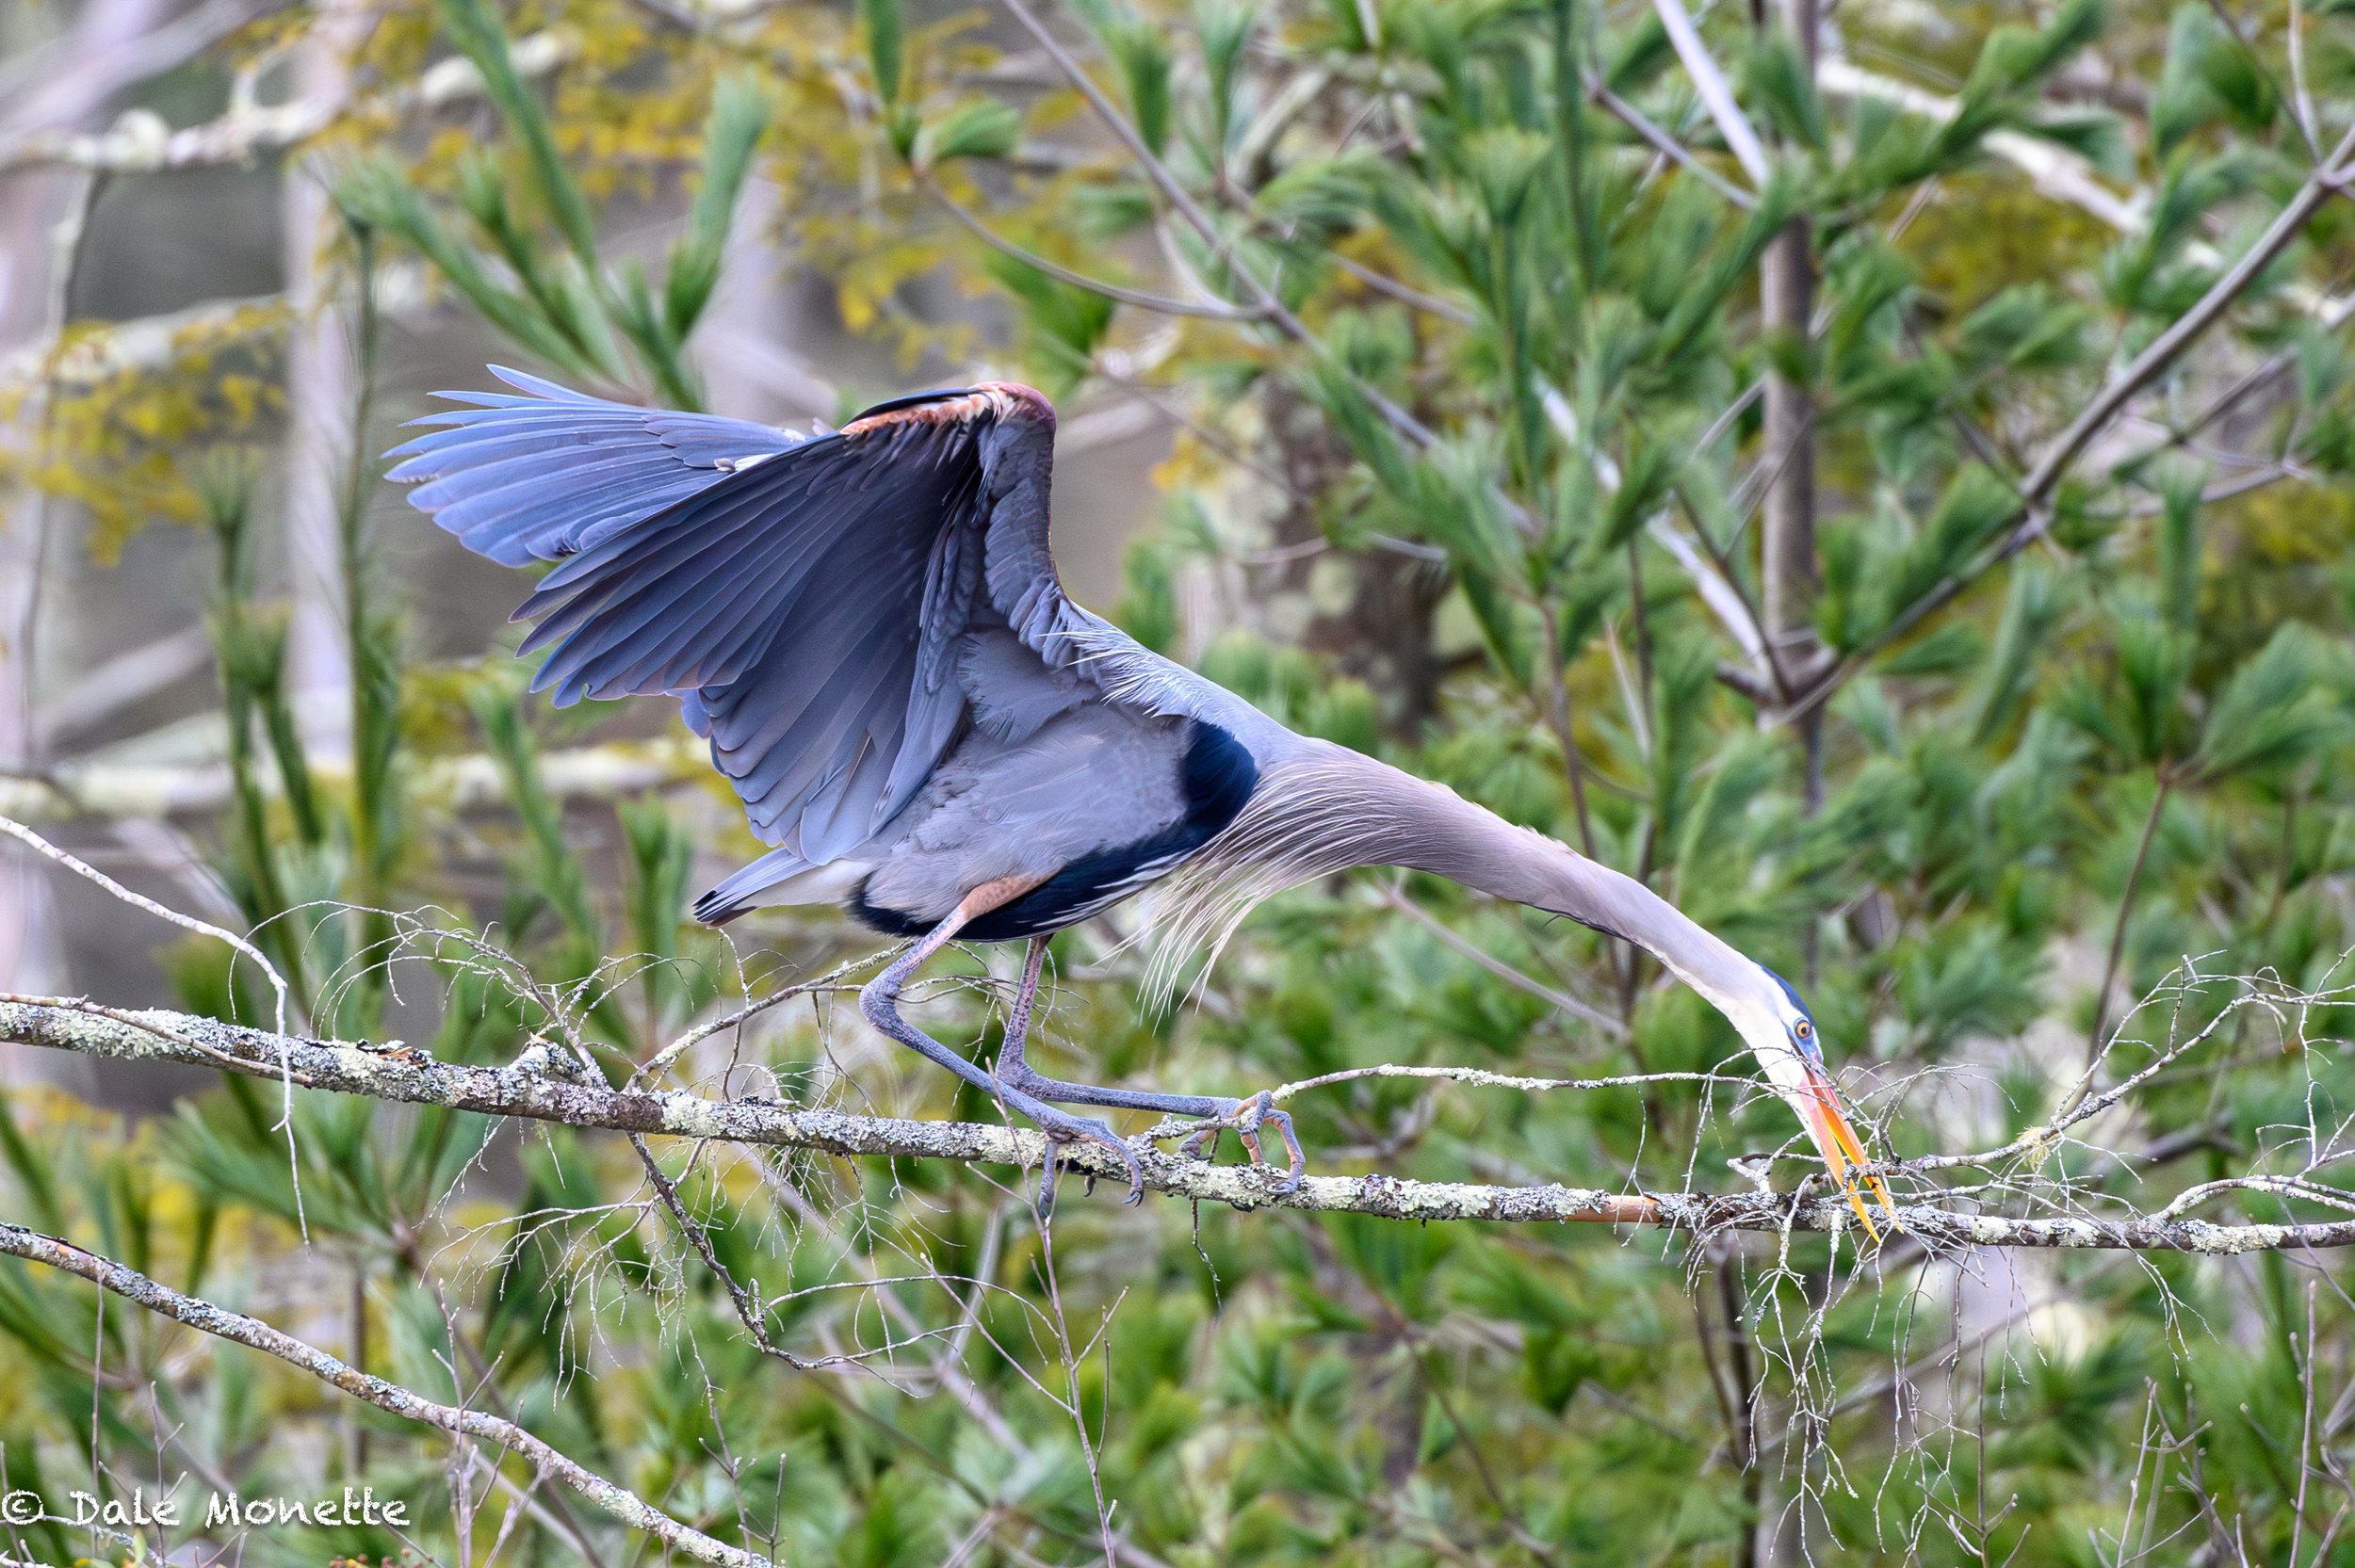   This guy was looking for lumber for the nest.  Spring is here and great blue herons waste no time rebuilding what the winter has done to their nests.  They use the same nests year after year.  